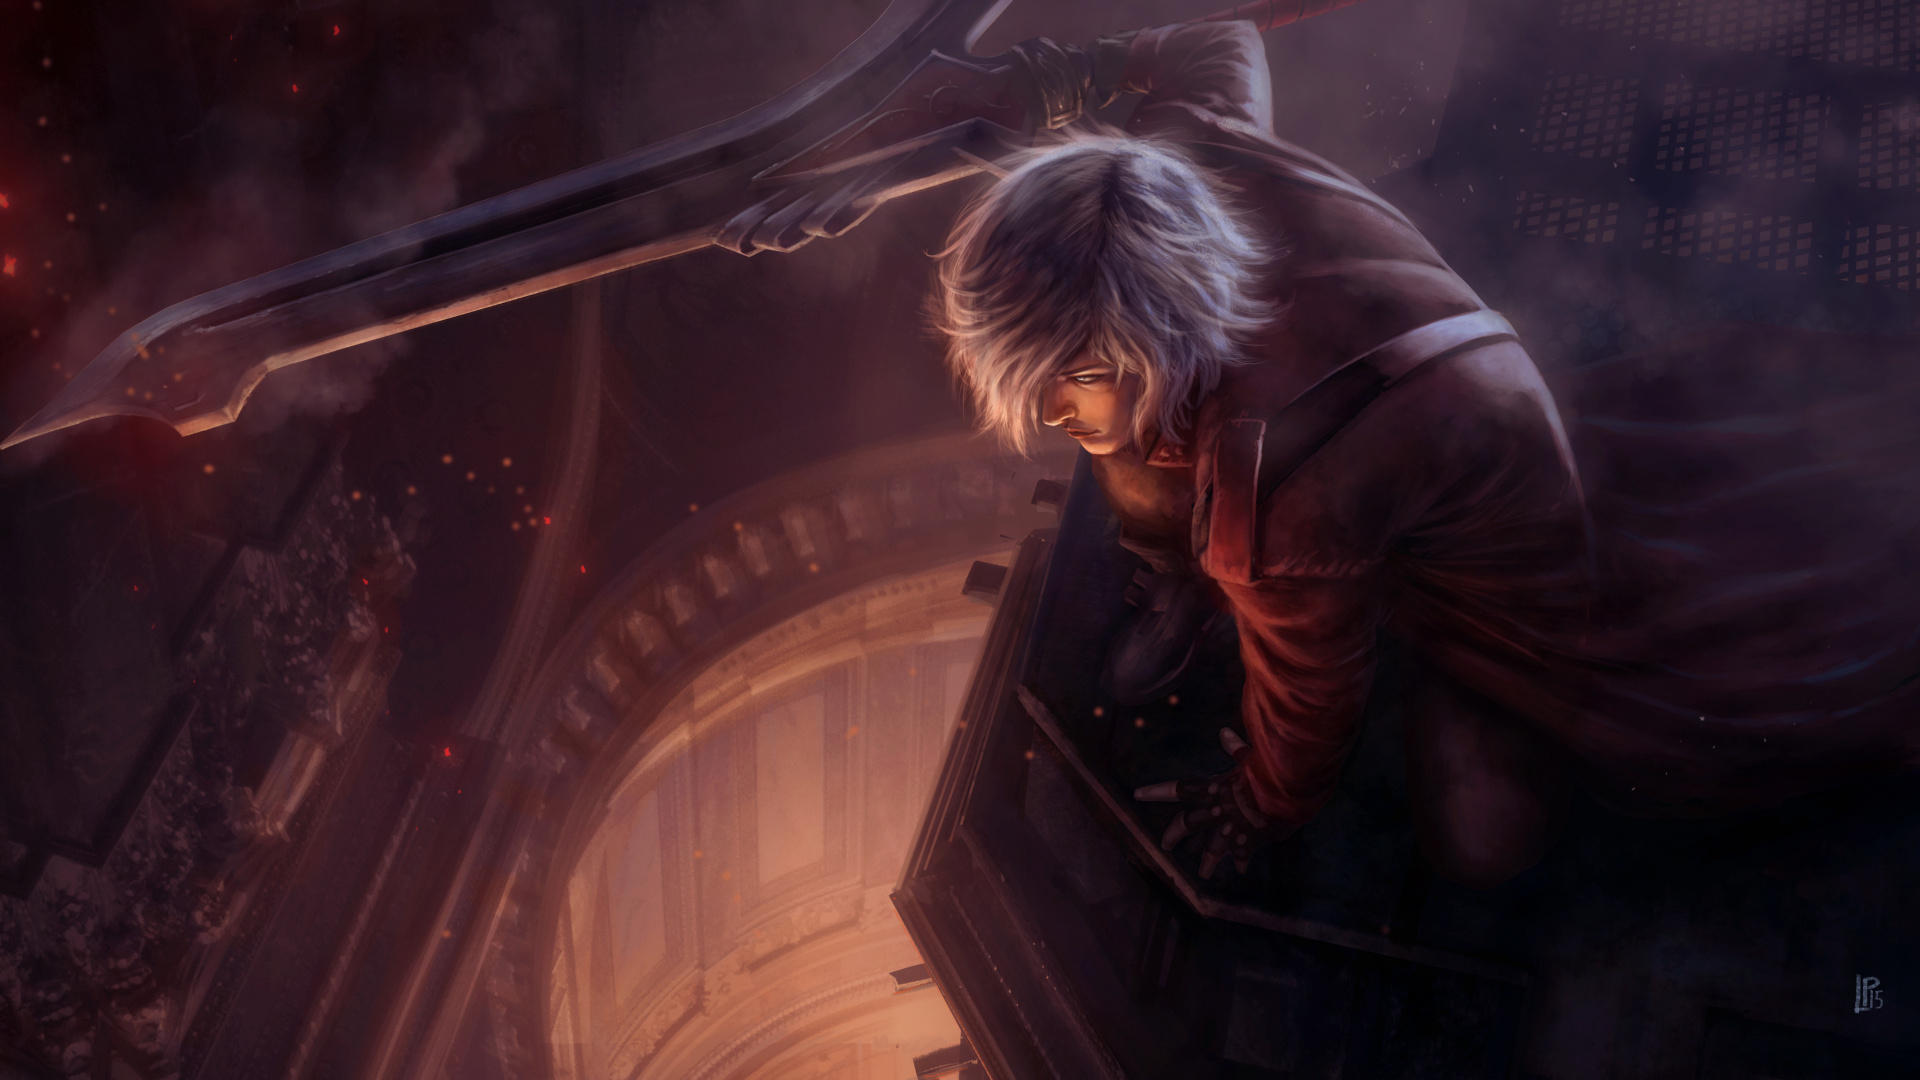 Devil May Cry, Devil May Cry 5, Dmc Devil May Cry, Devil May Cry 4, Dante. Wallpaper in 1920x1080 Resolution